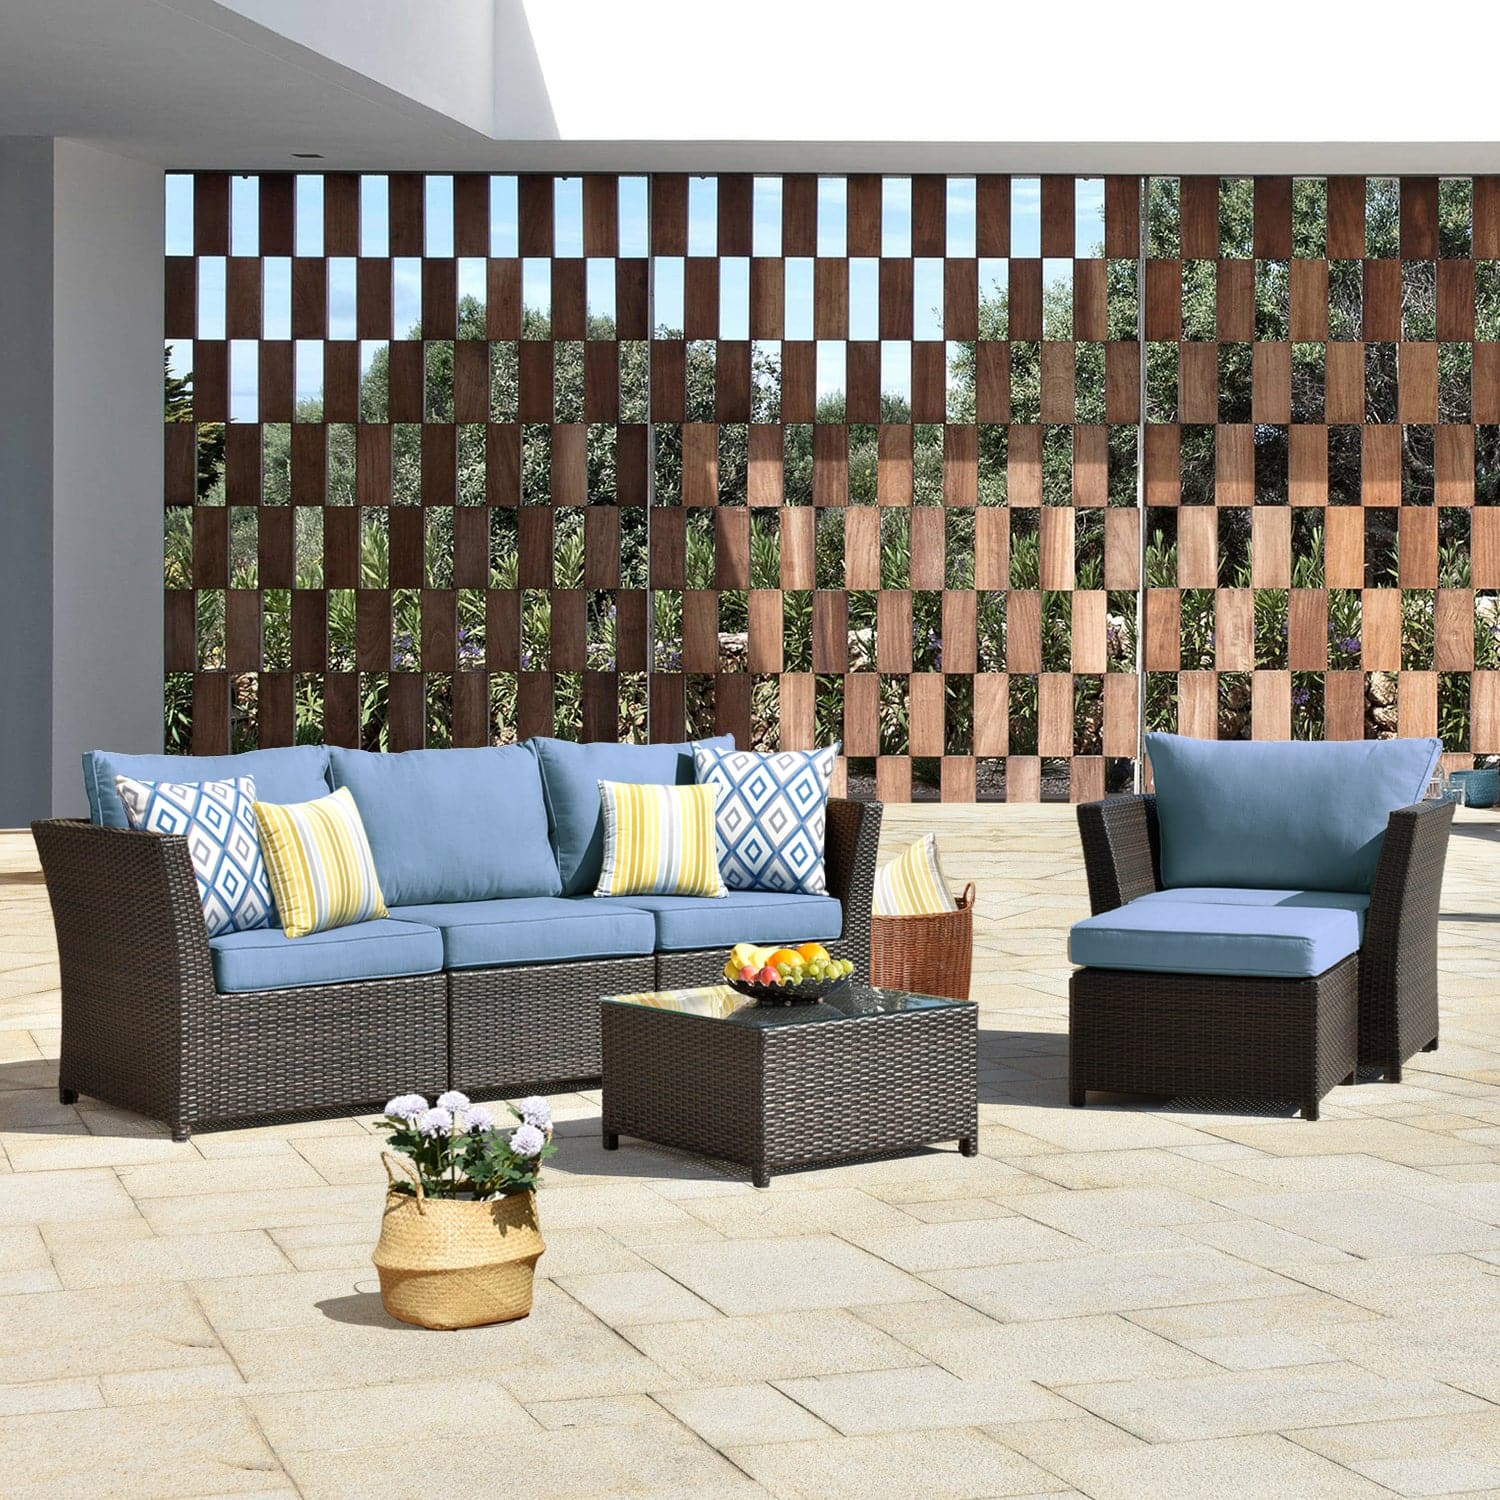 Ovios Patio Furniture Set Rimaru 6-Piece with 2 Pillows, No Assembly Required